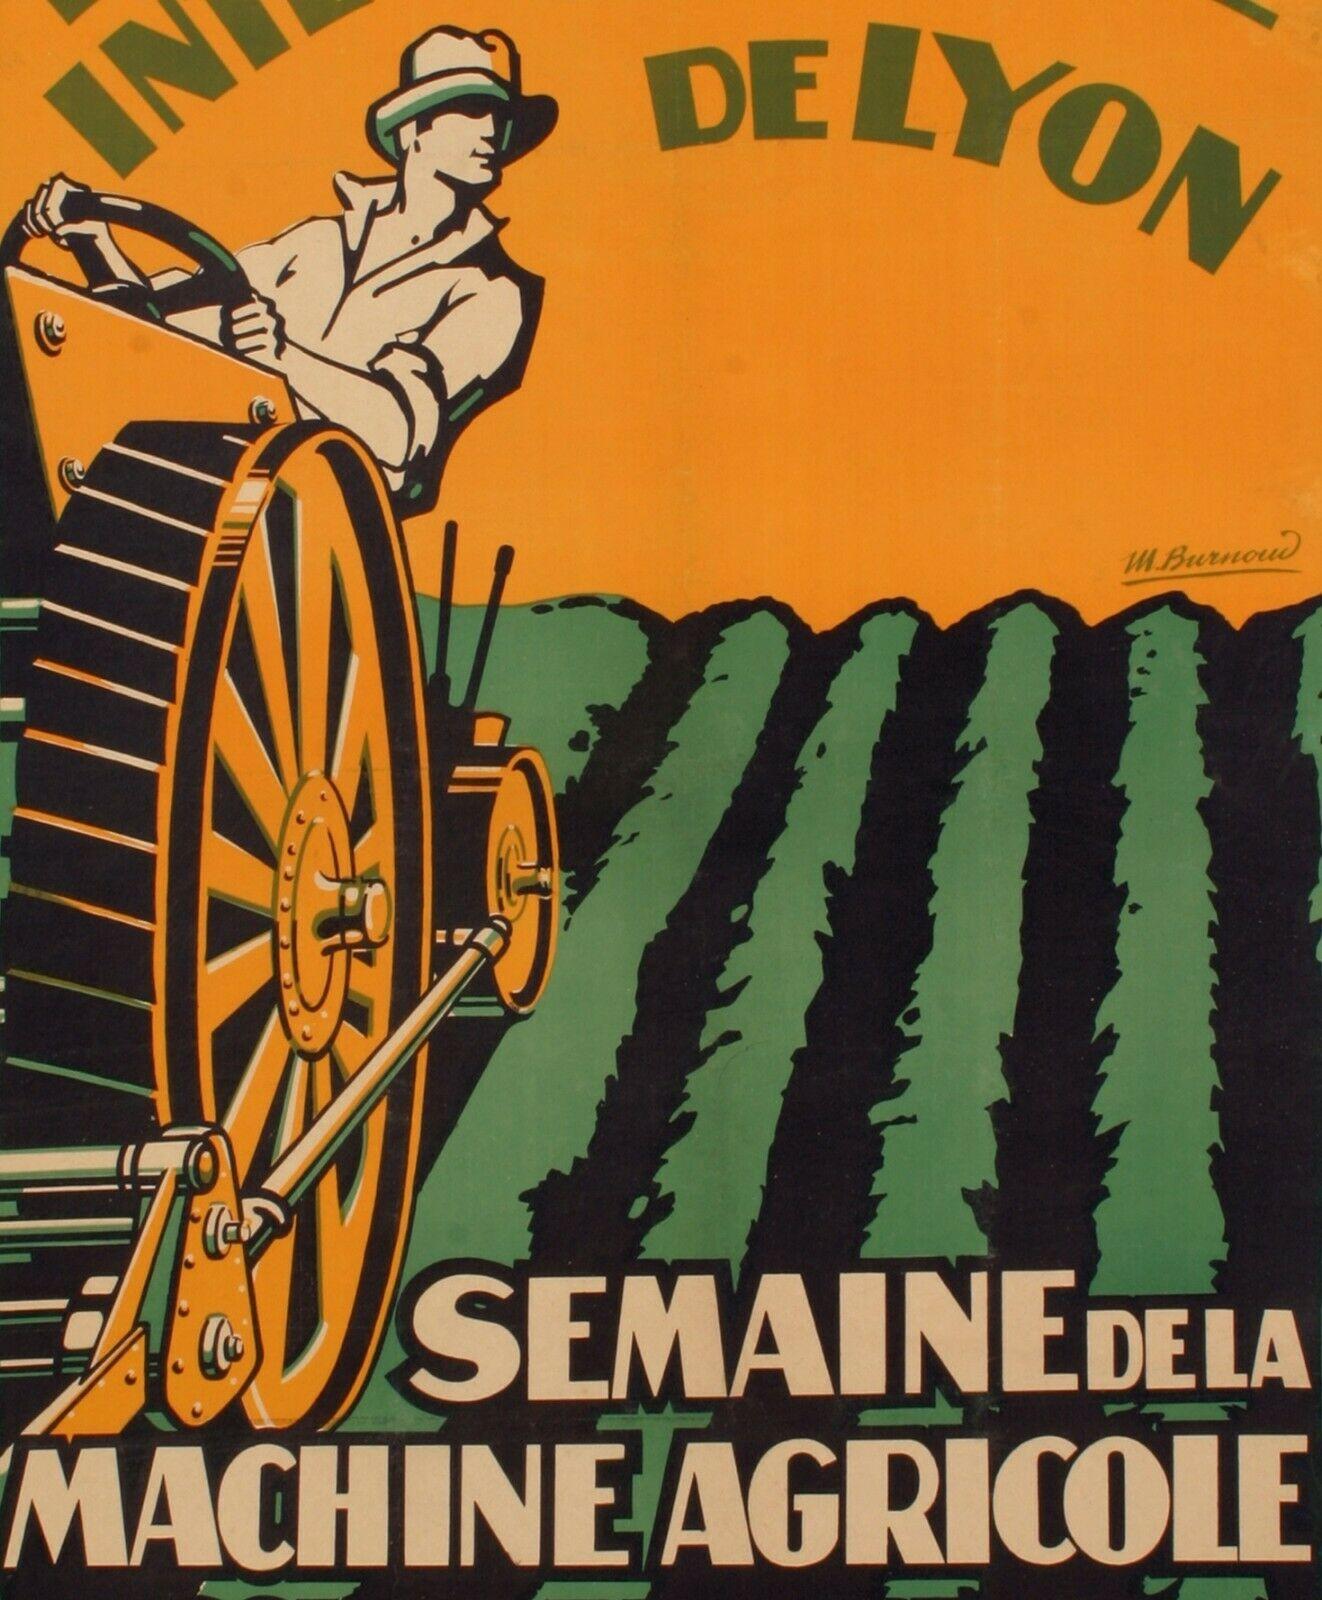 Original Art Deco Poster-Burnoud-Agricole International Fair of Lyon, 1927

This poster promotes the fair that took place from March 12th to 20th, 1927. It took place every year Cours de Verdun and hosted the 